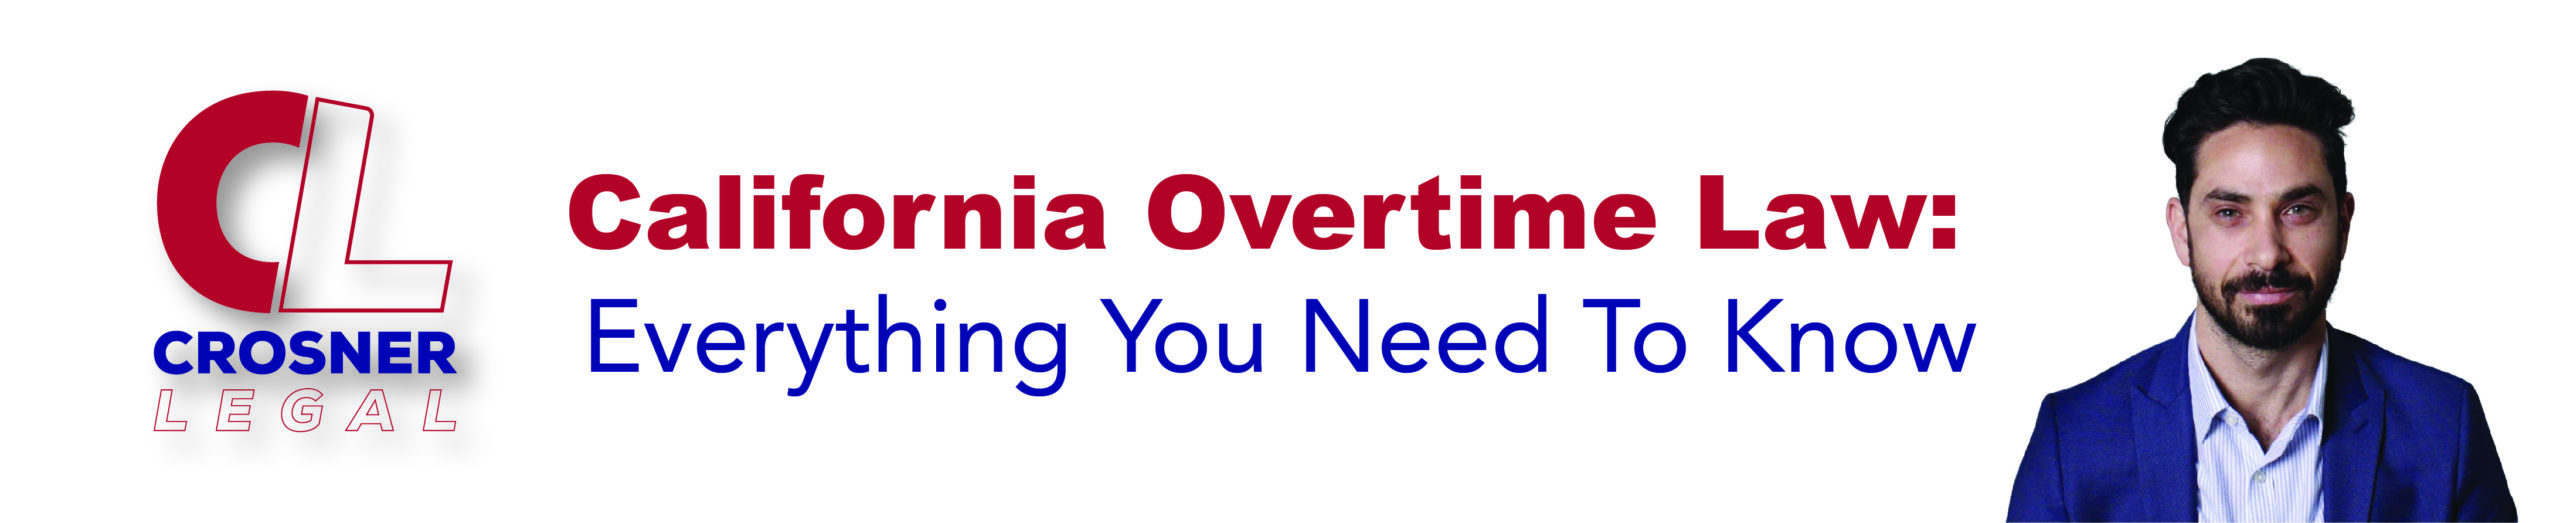 California Overtime Law: Everything You Need To Know